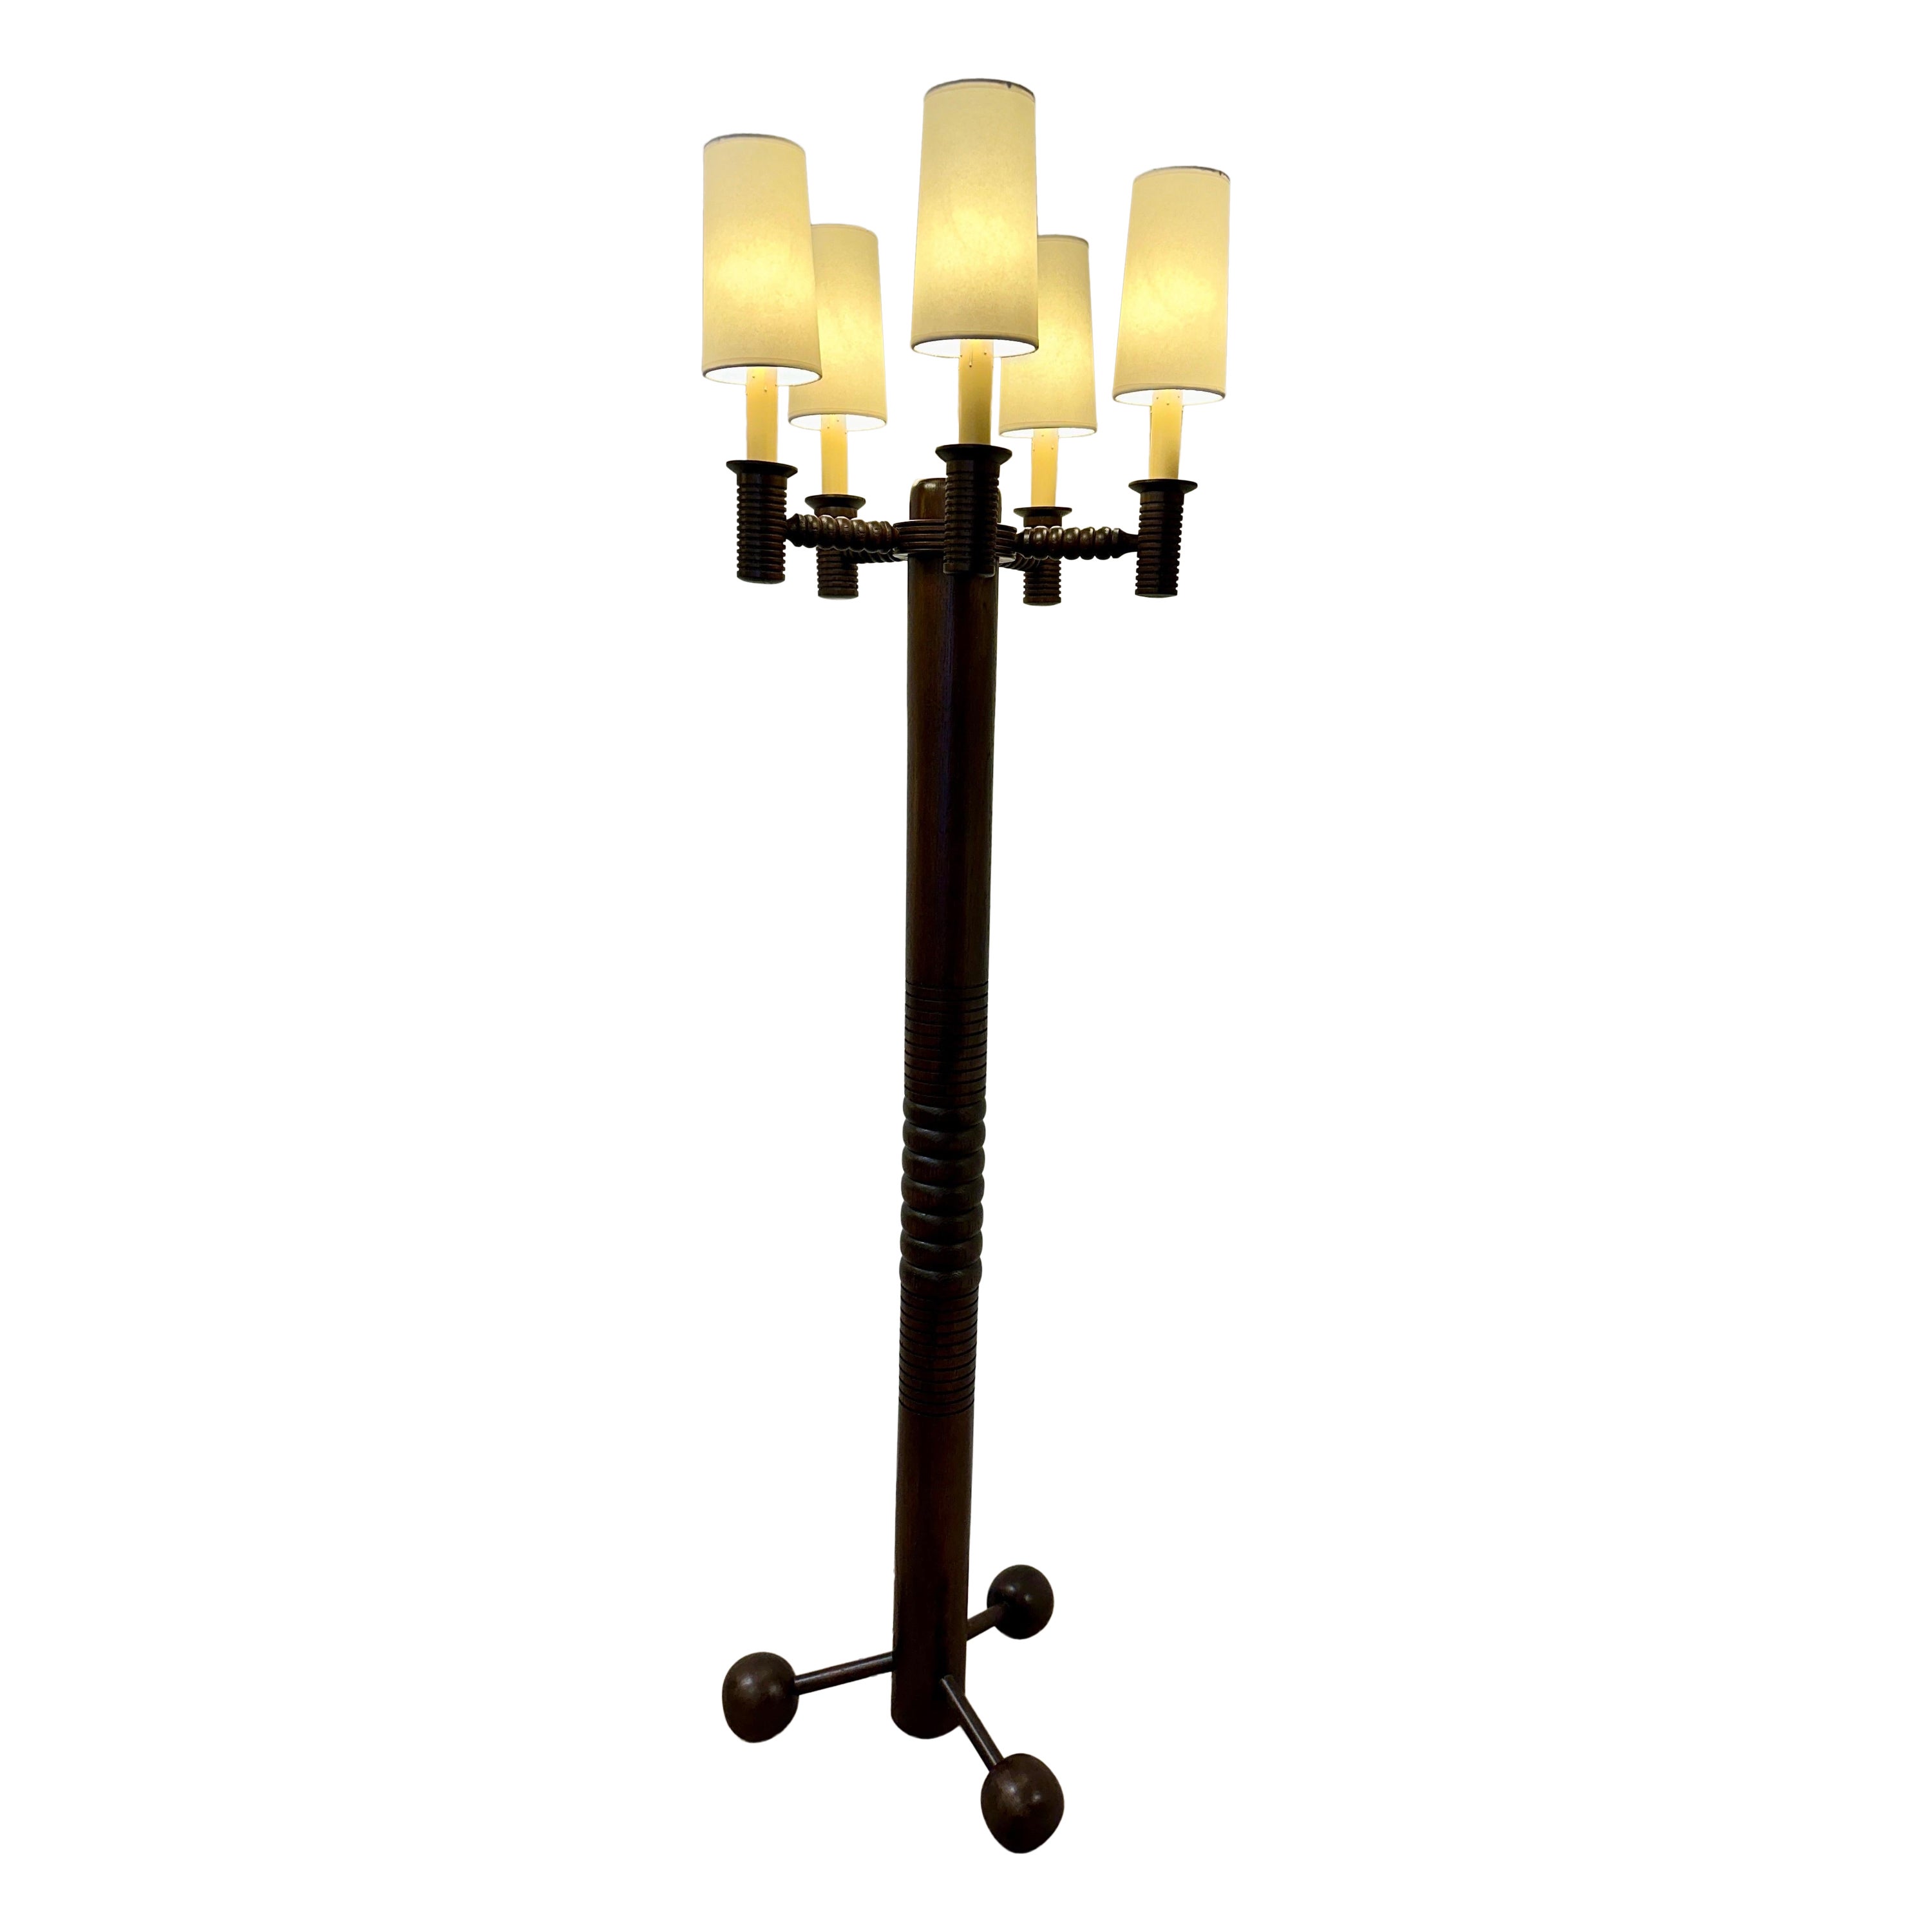 French Turned Oak 5-Arm Candelabra Style Floor Lamp - TWO AVAILABLE For Sale